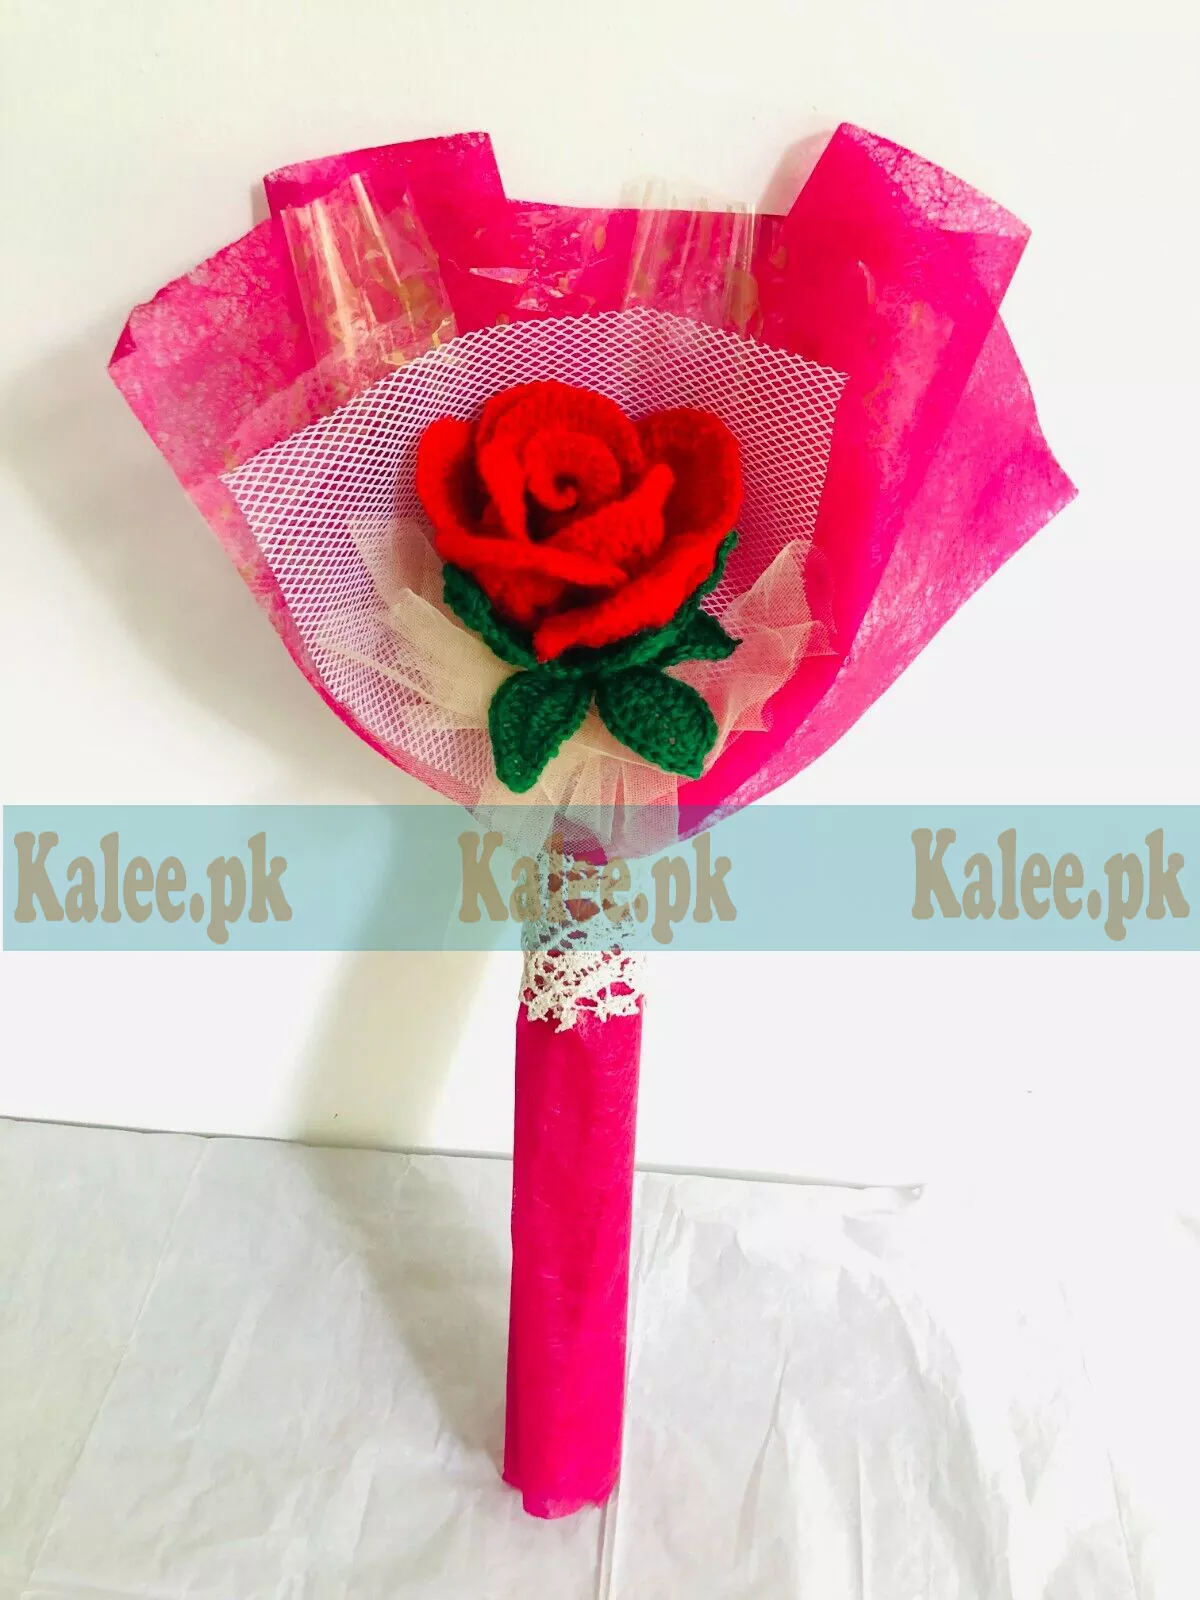 A single red rose delicately wrapped in vibrant colorful plastic.